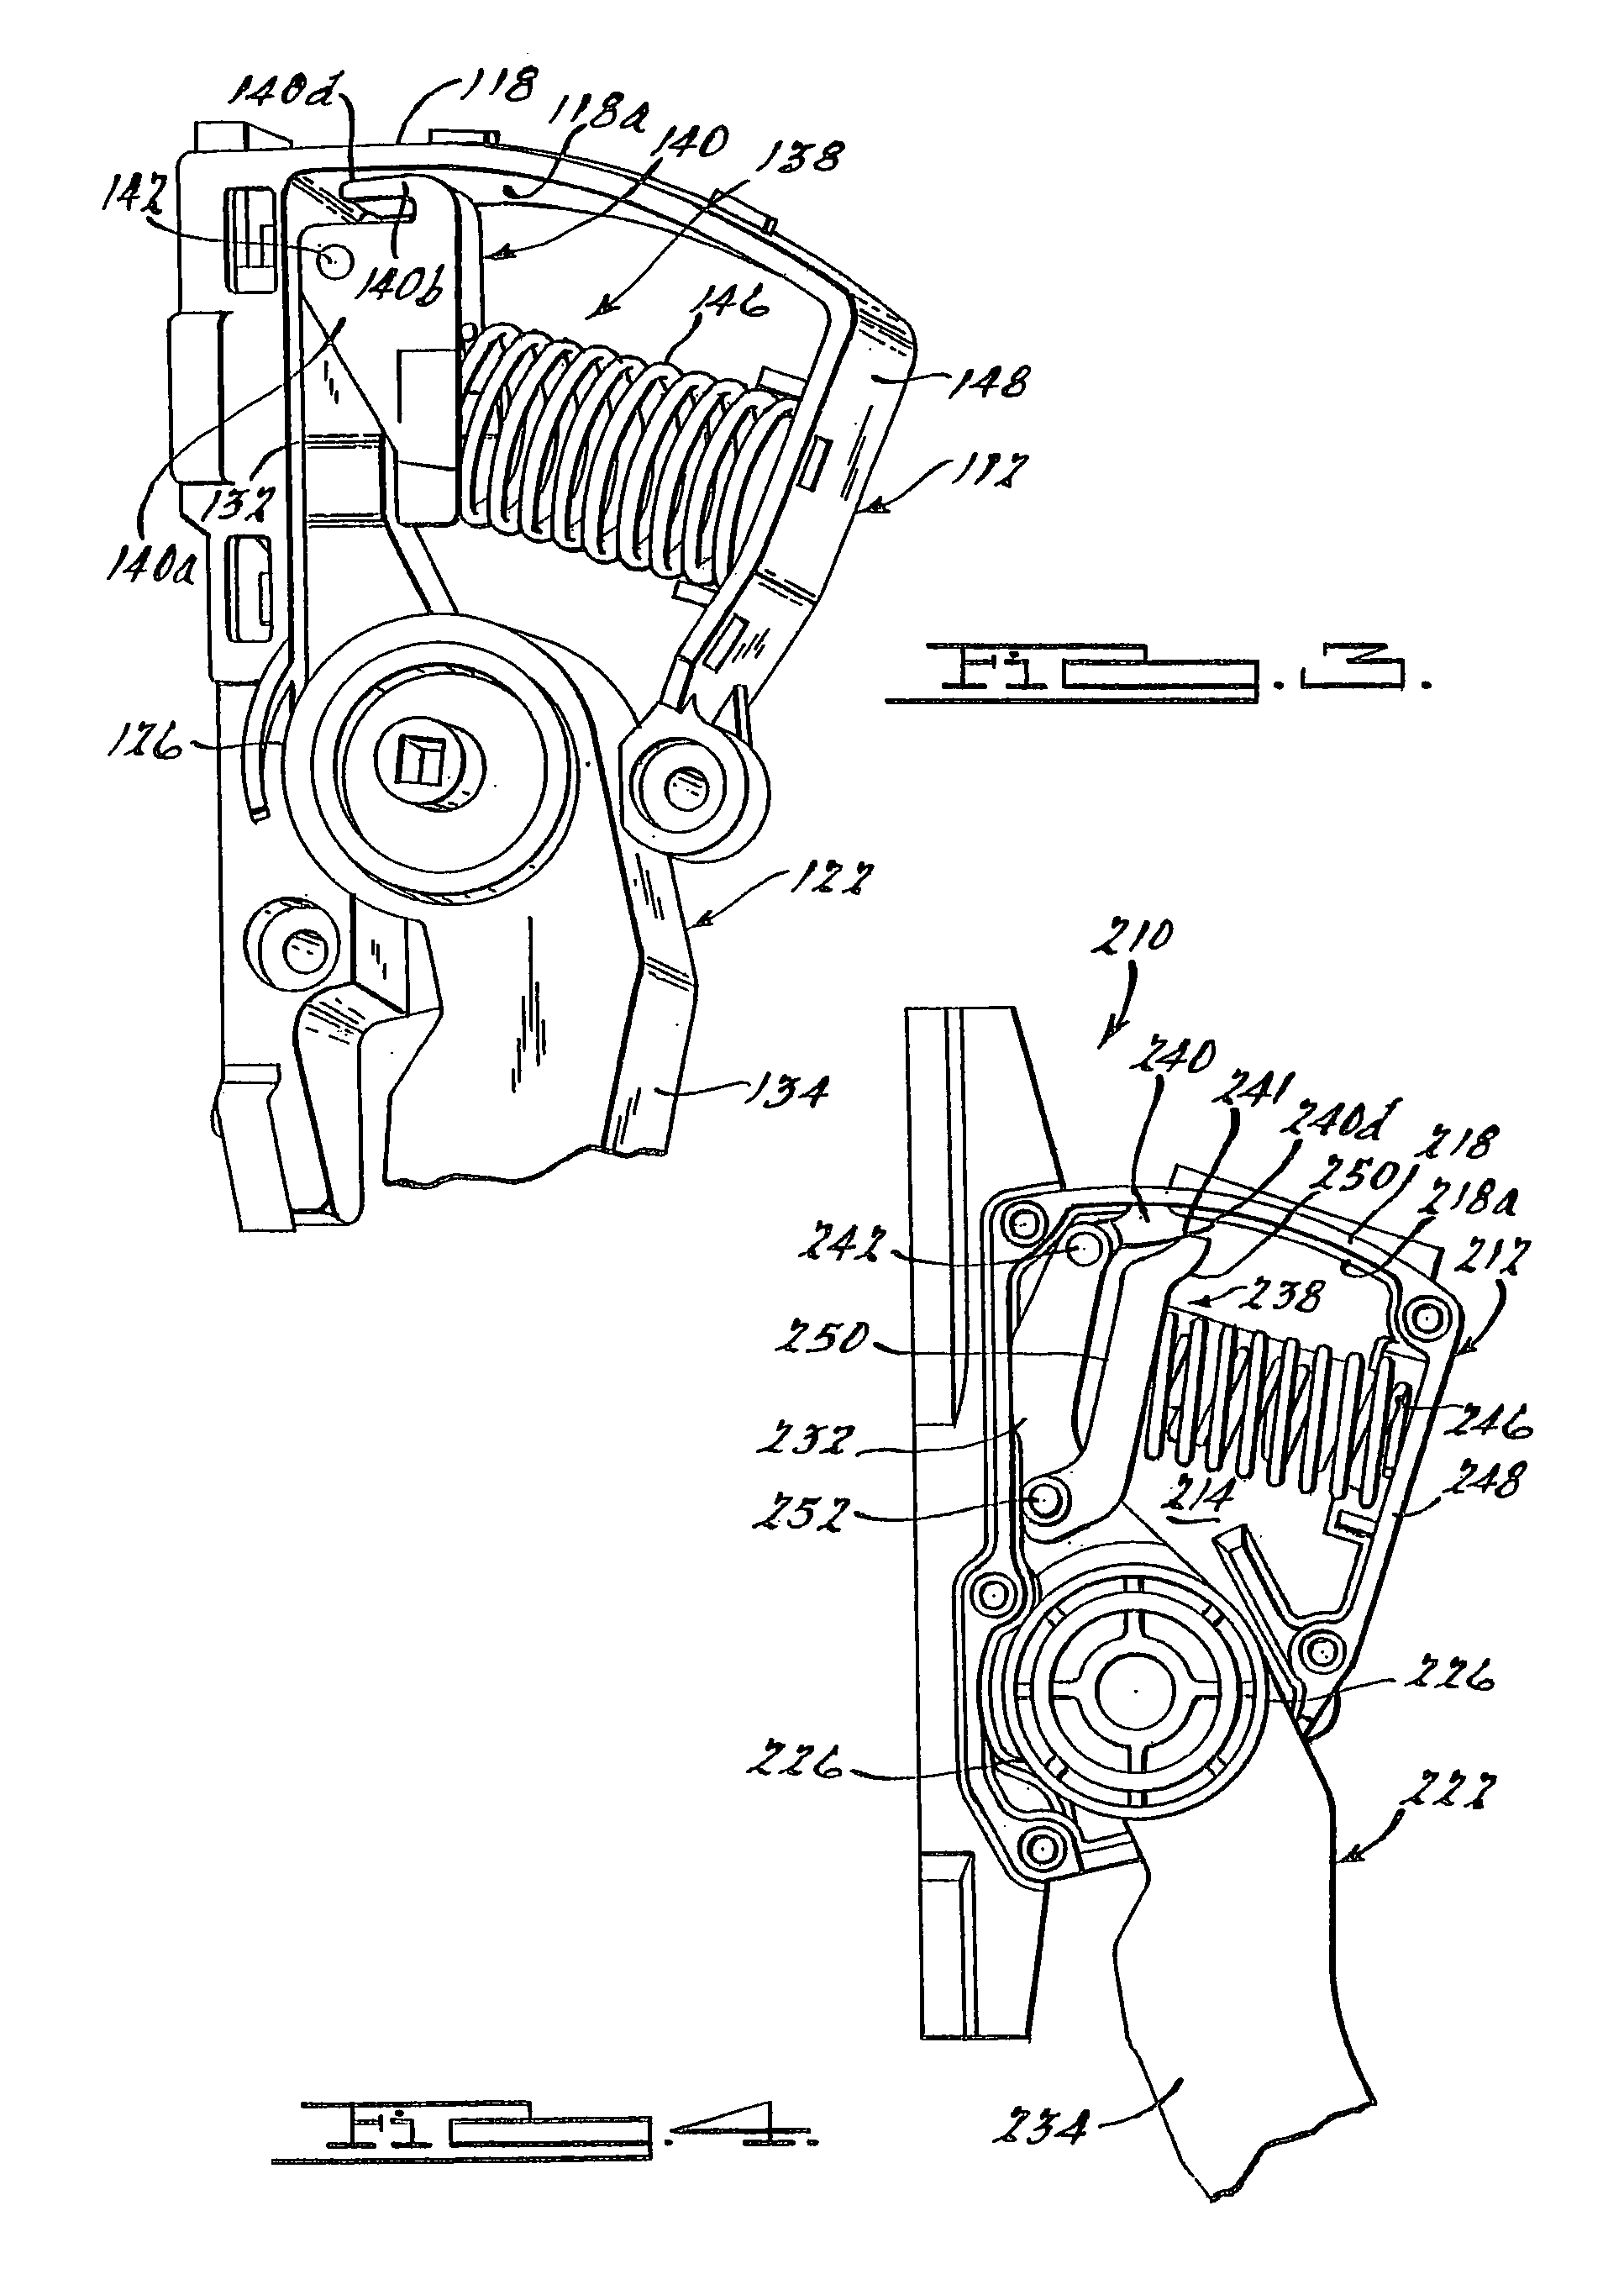 Electronic throttle control with hysteresis device